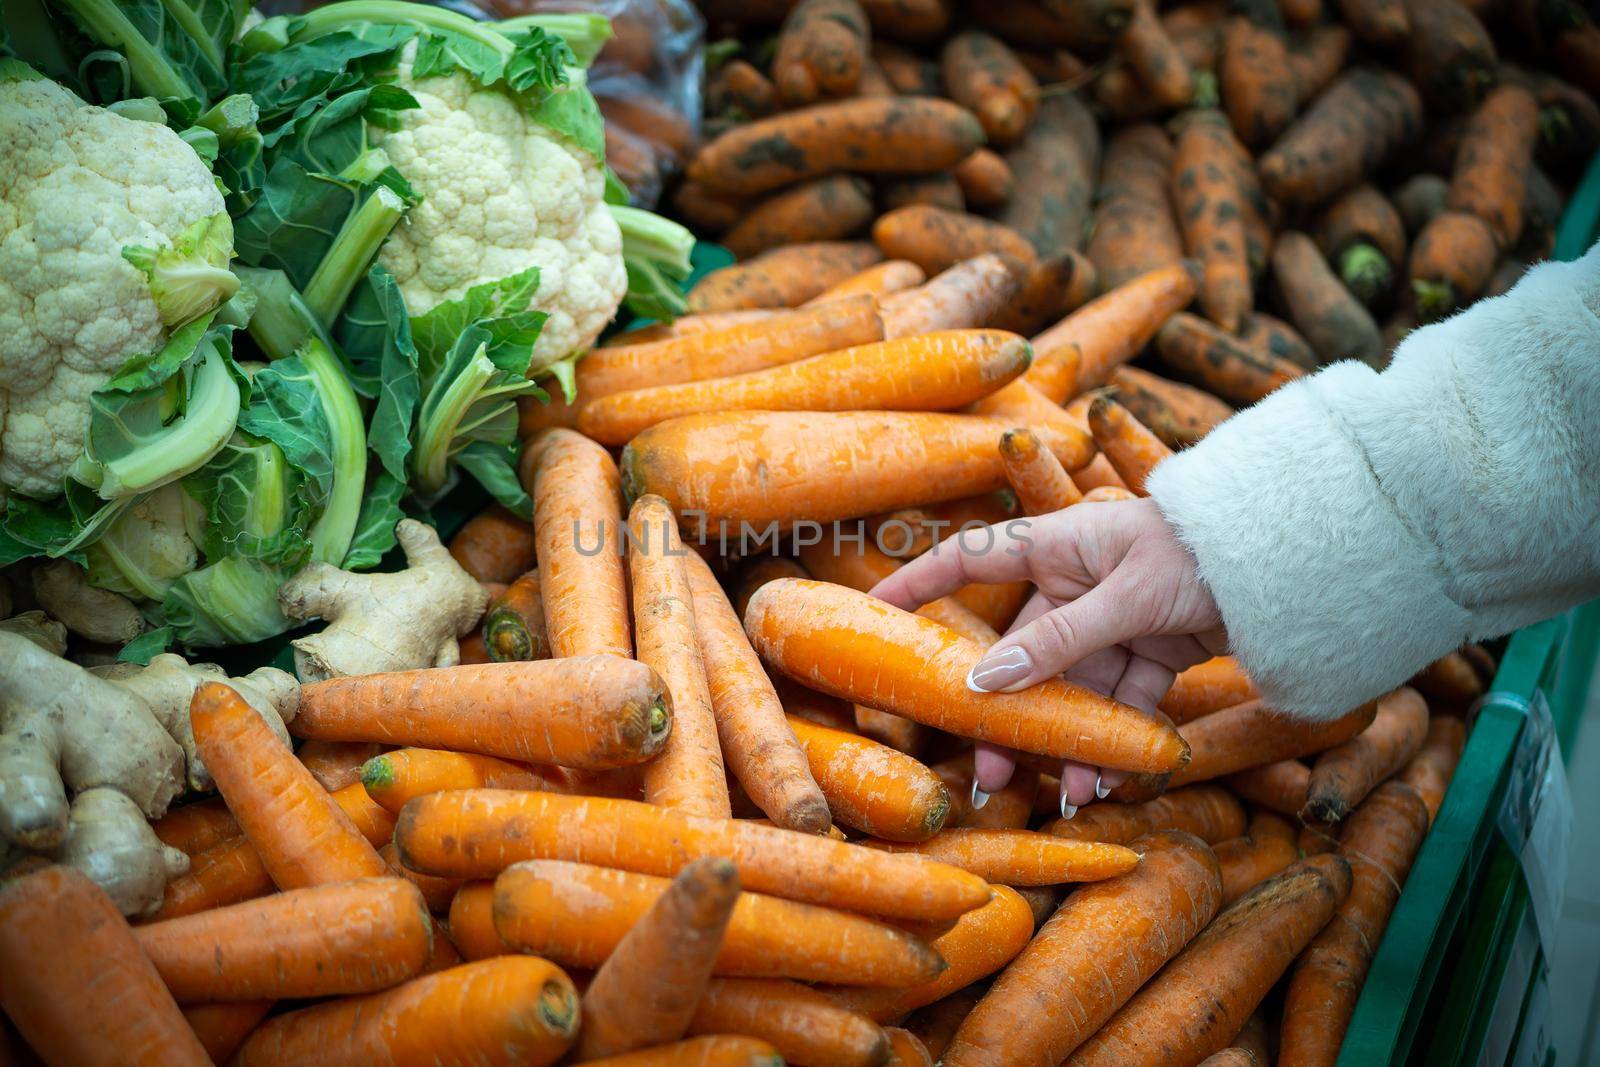 A woman's hand, buying groceries at the supermarket. Vegetables and fruits in a large assortment.